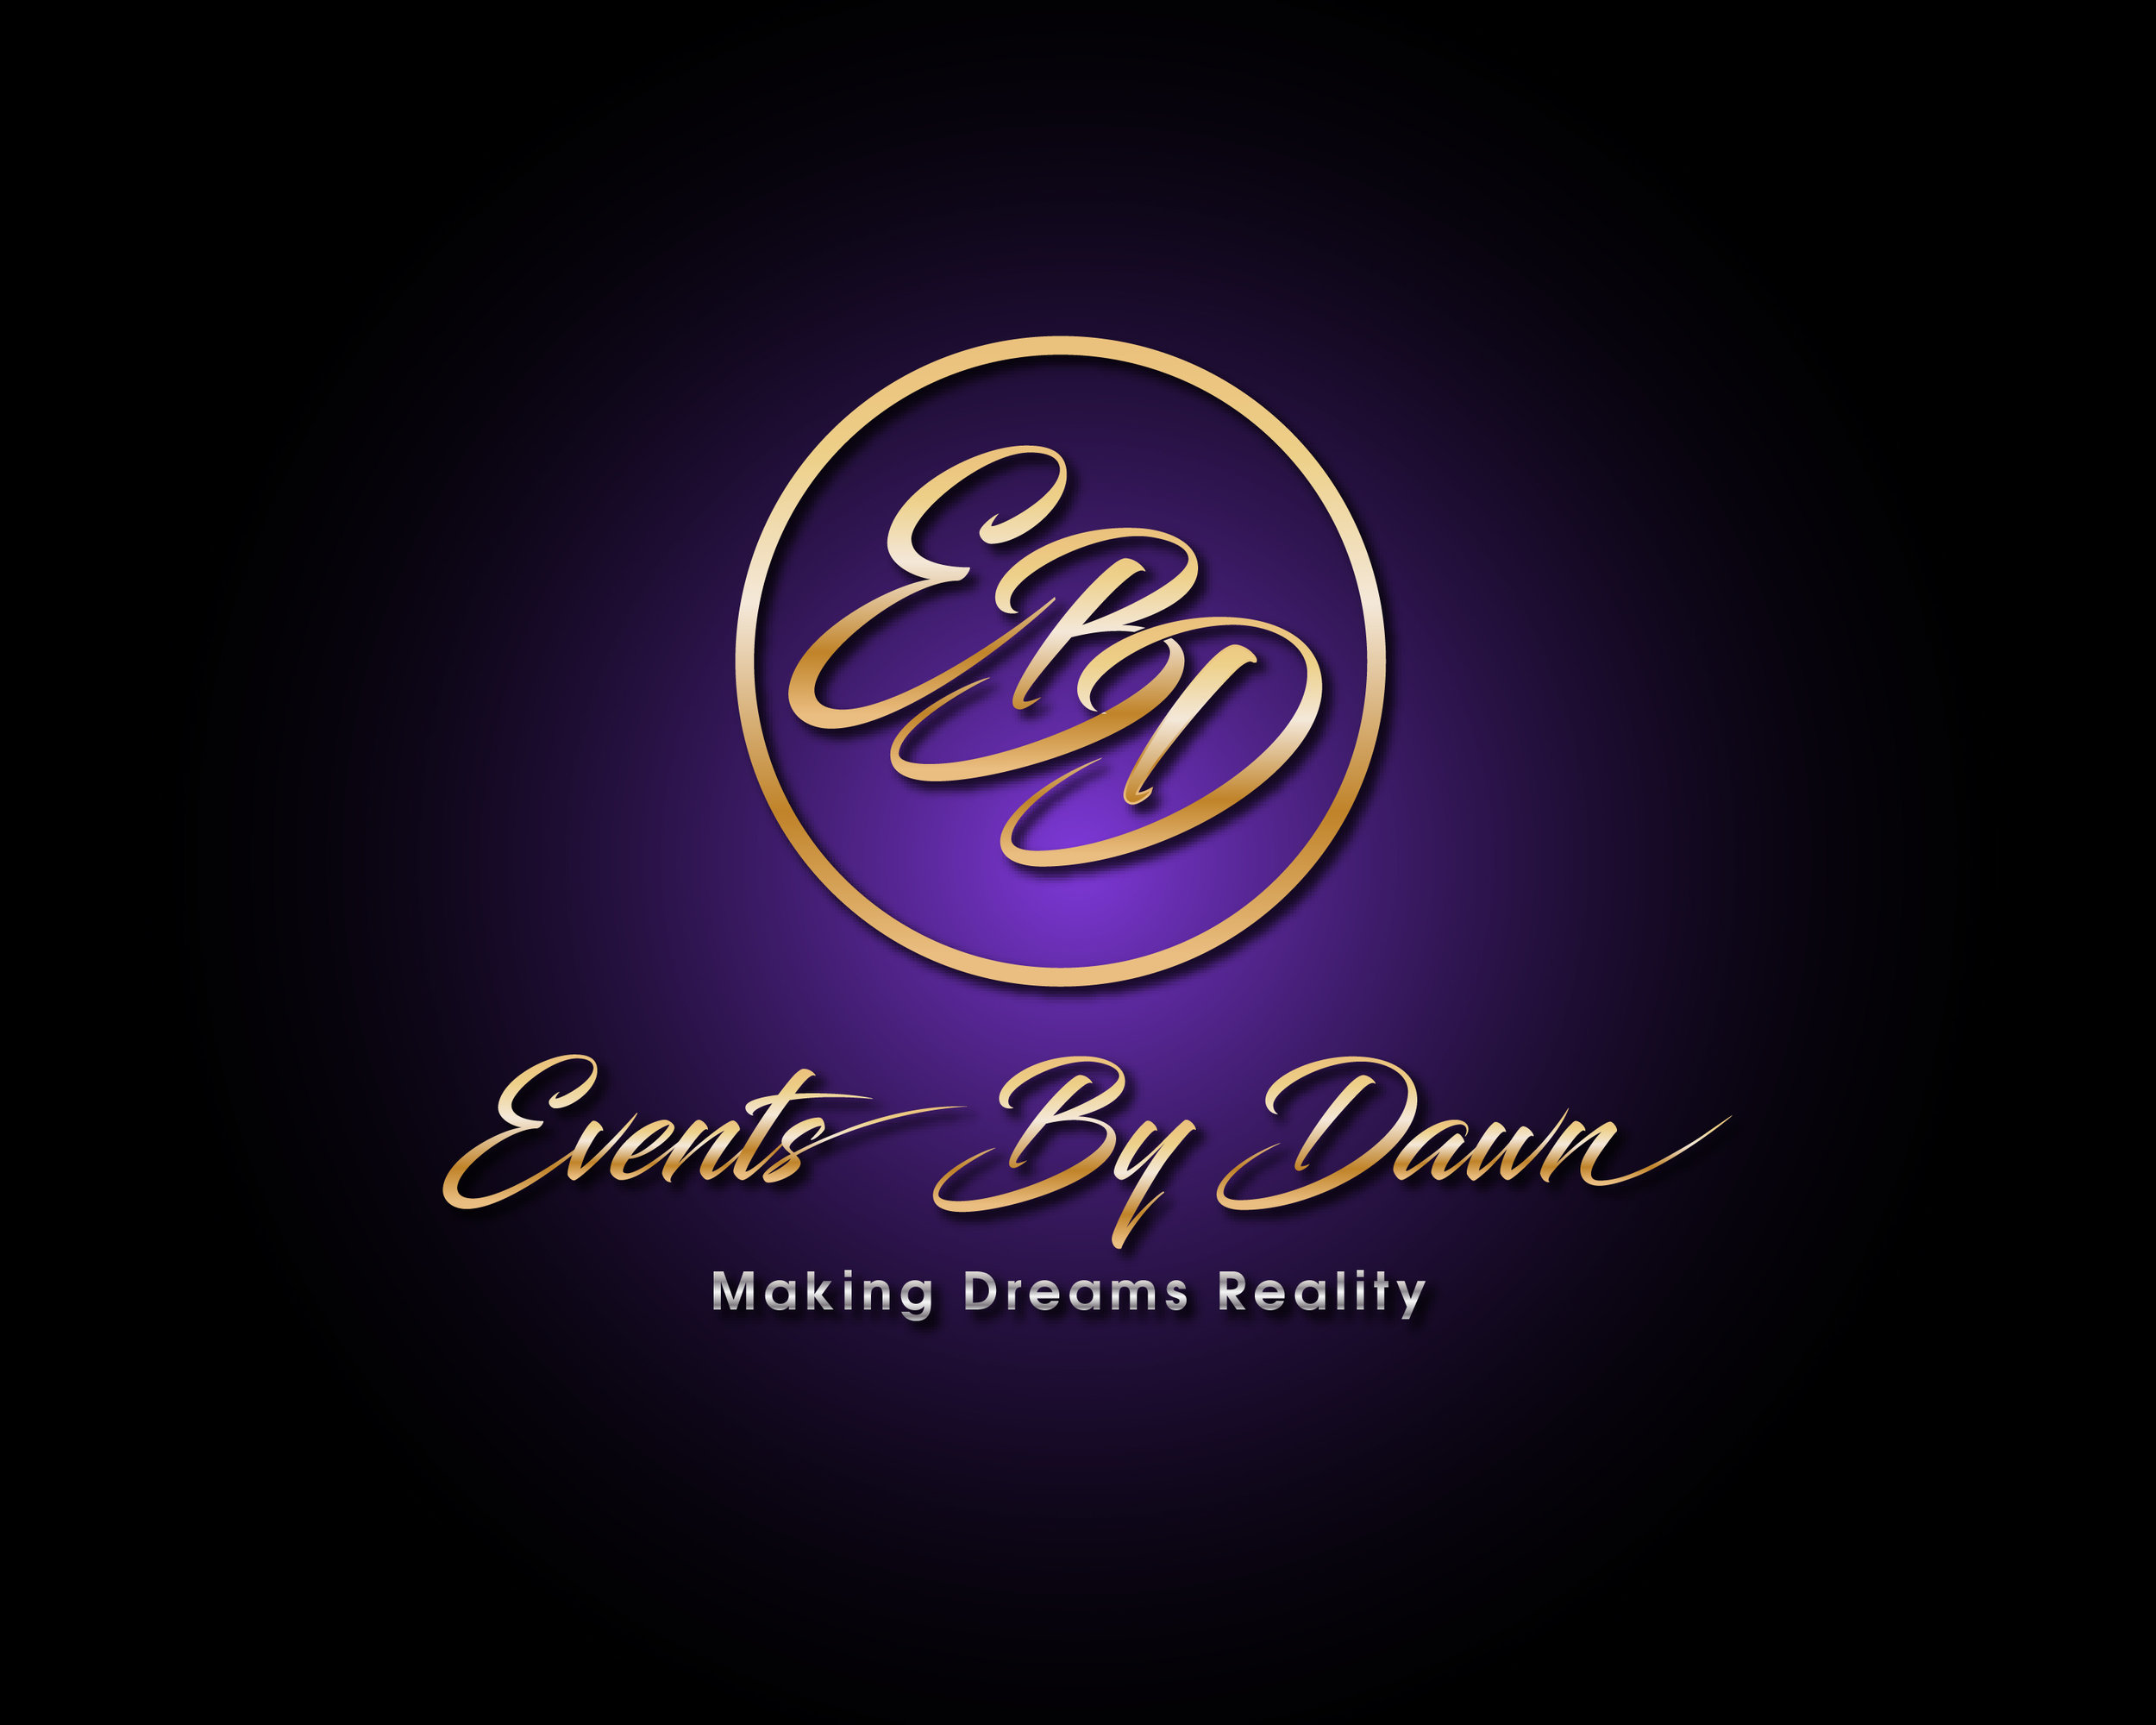 Events By Dawn...Making Dreams Reality.